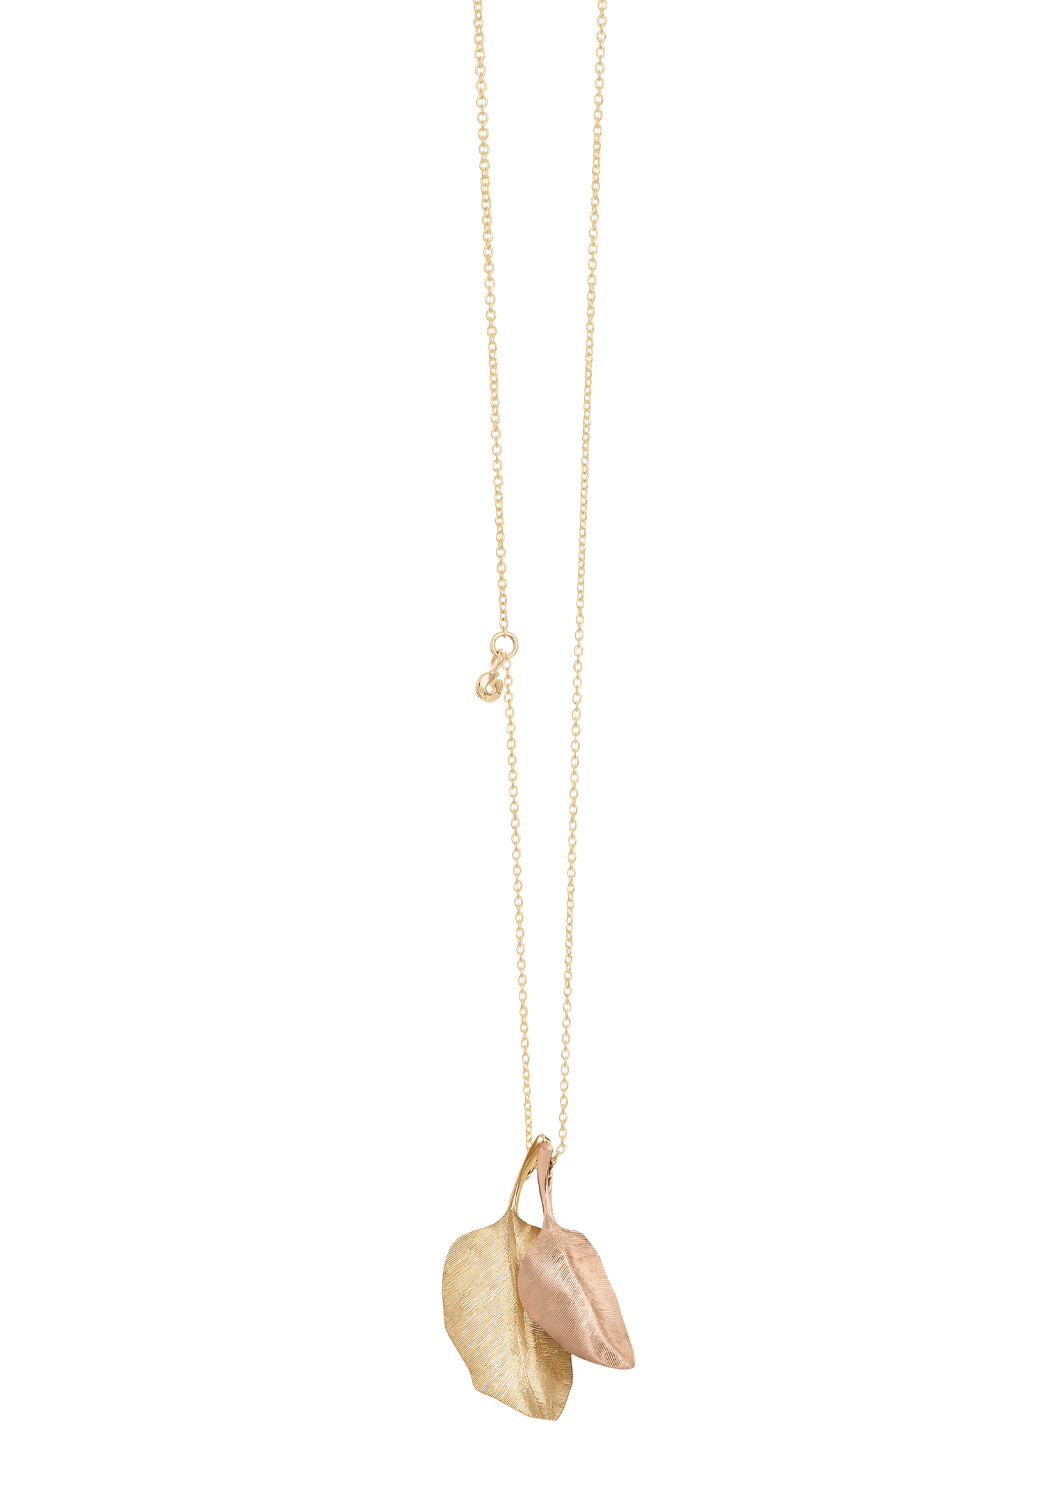 Ole Lynggaard Leaves 18K Rose Gold Leaf Pendant Style Ideas (Sold separately) | OsterJewelers.com